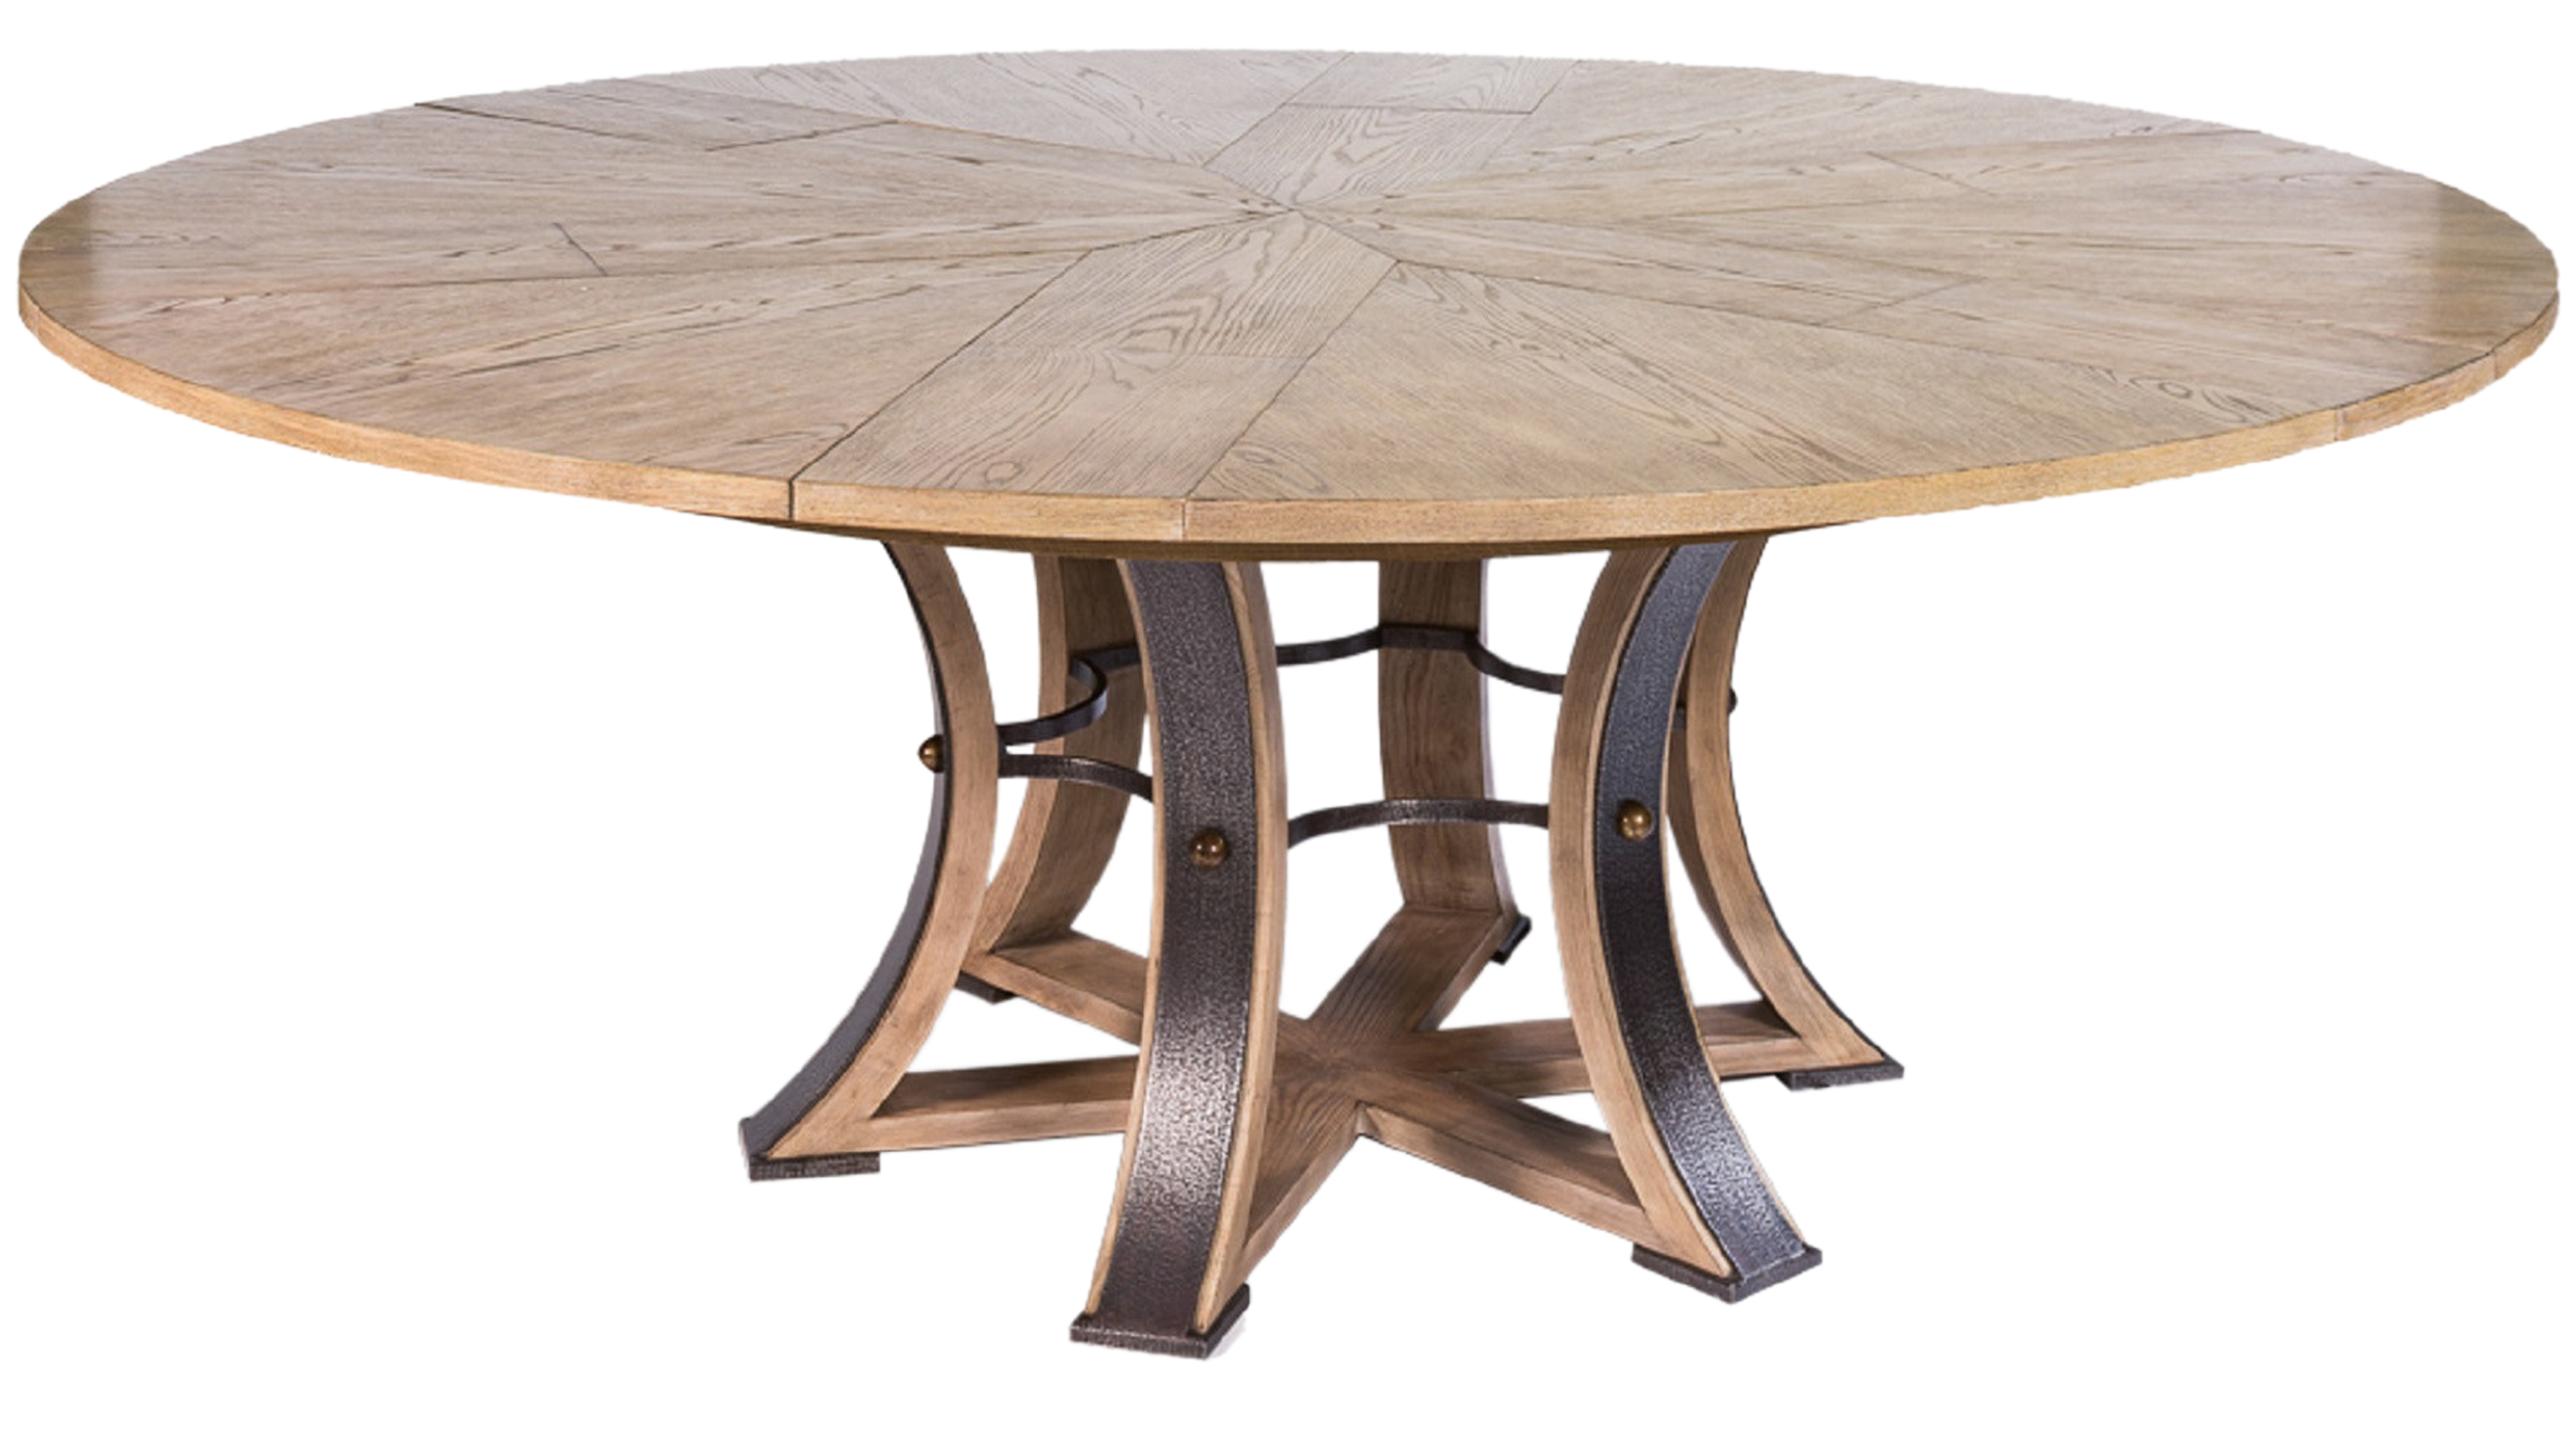 Expandable Dining Table - Transitional Organic Mid-Century Modern Dining  Room Tables - Dering Hall